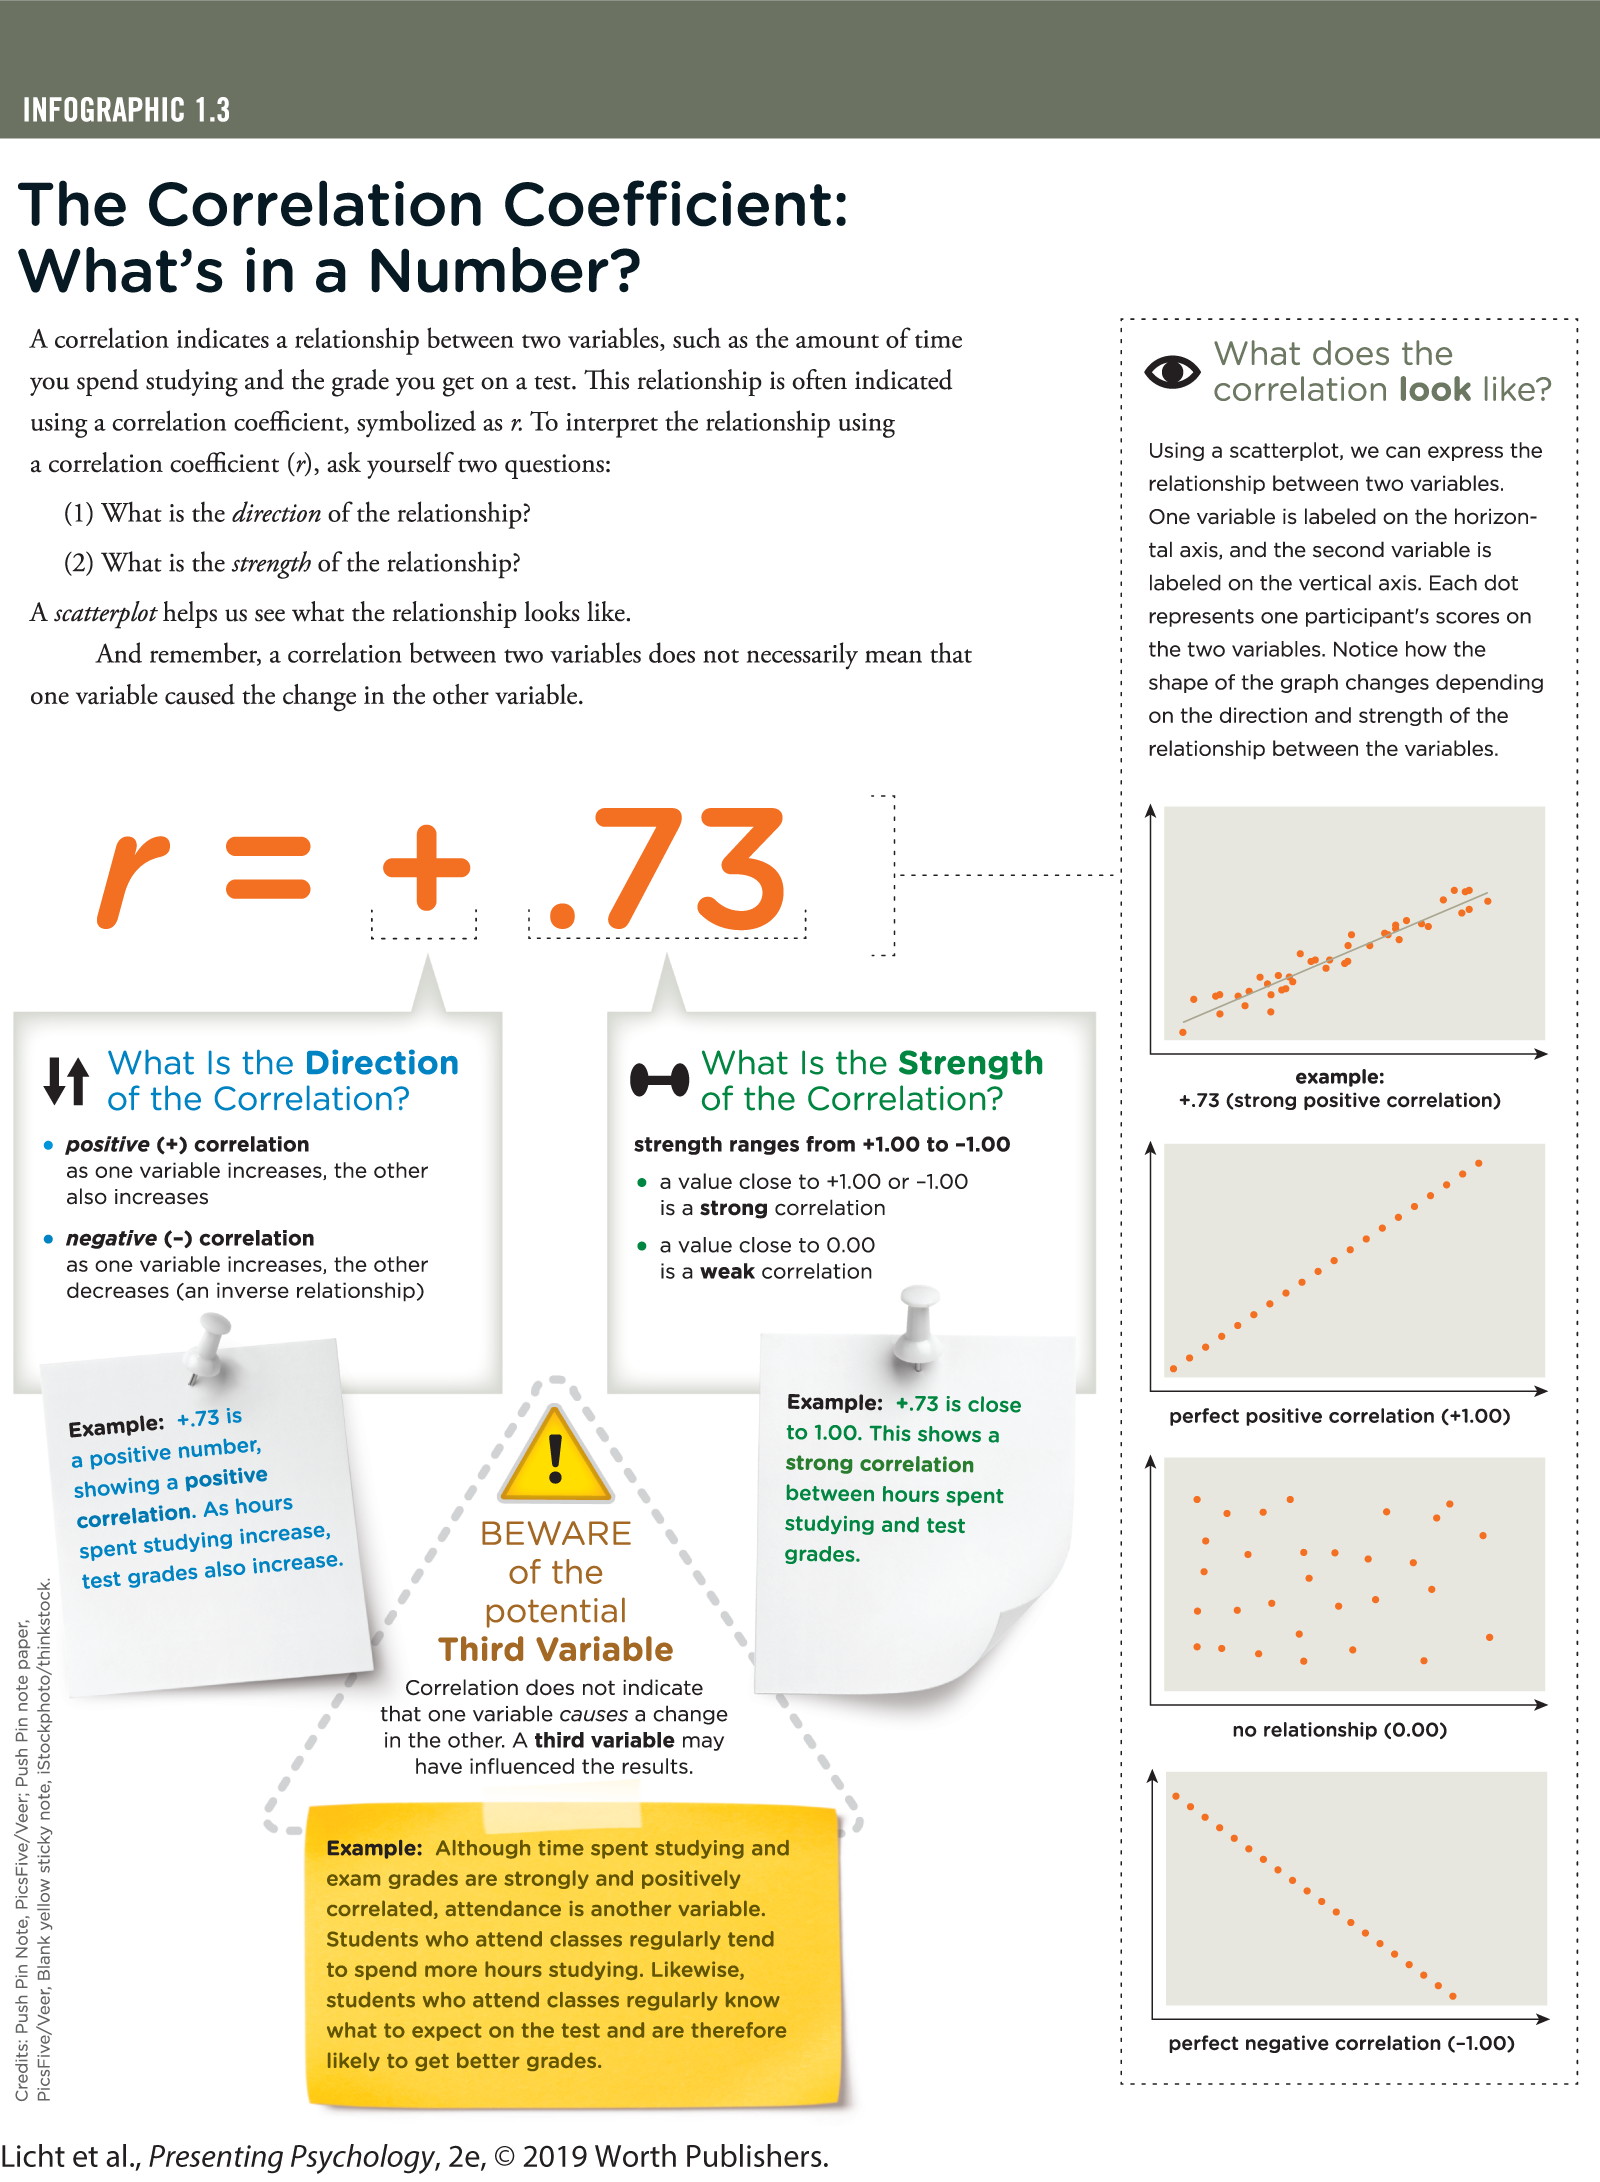 An infographic is titled, The Correlation Coefficient: What’s in a Number?, that explains the direction and the strength of a correlation along with an example. You can read full description from the link below